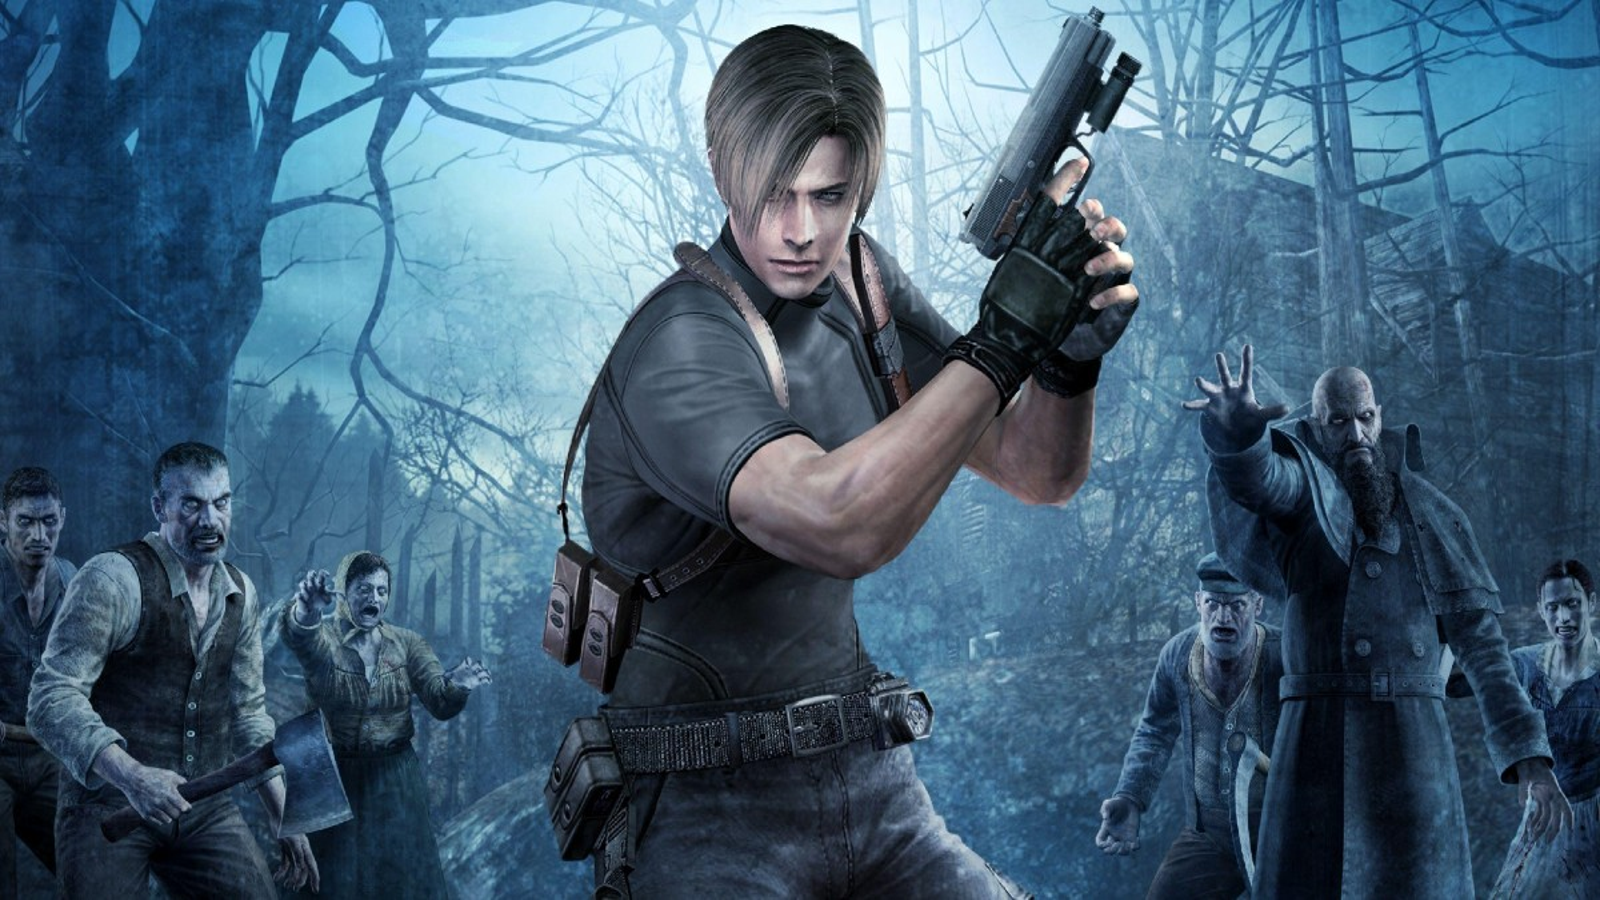 Dead but rising: Resident Evil HD Remaster review